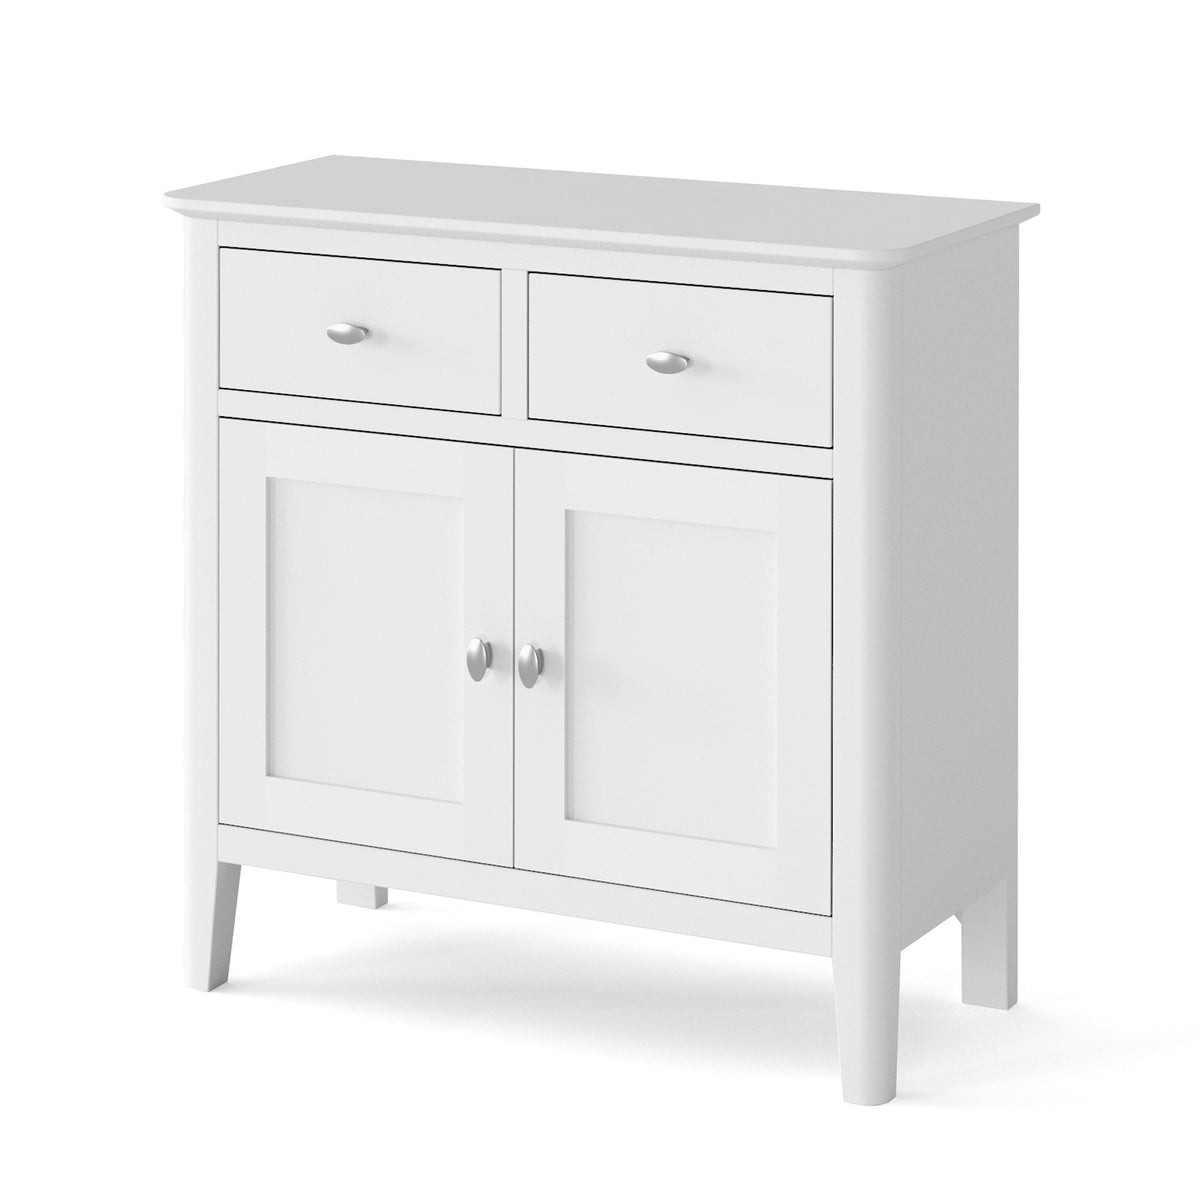 Chester White Mini Sideboard - Side view